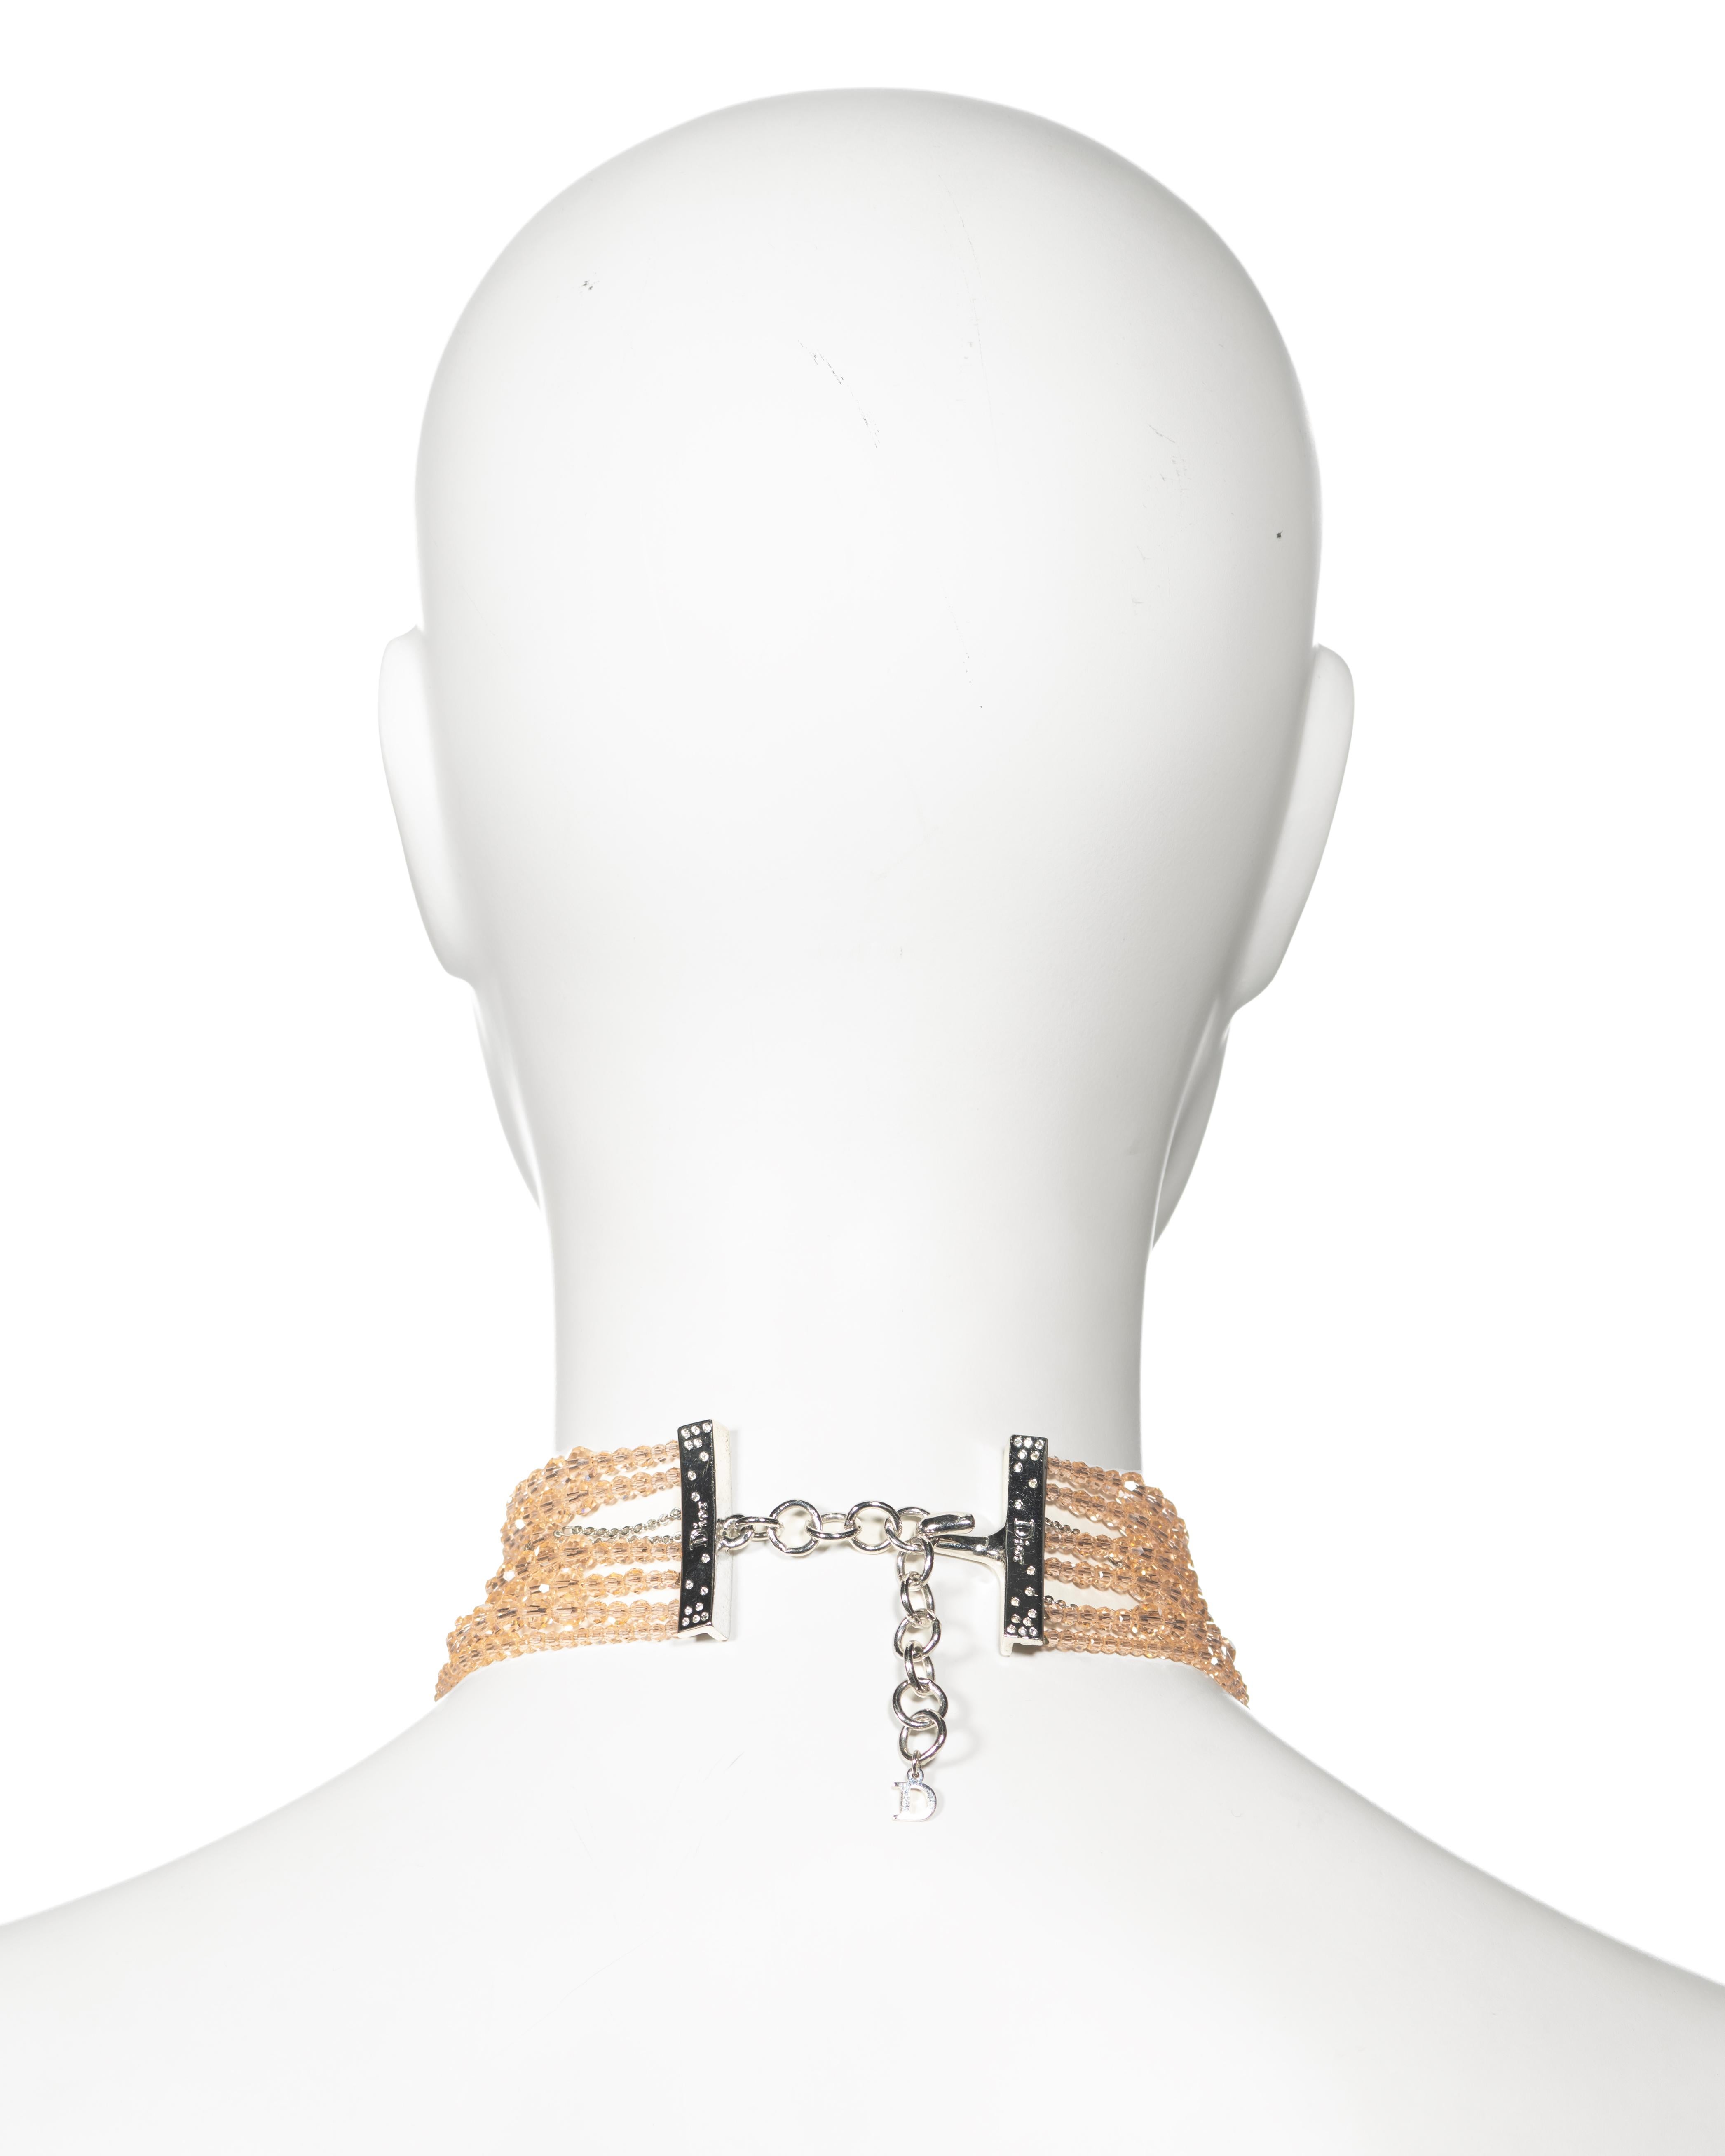 Christian Dior by John Galliano Distressed Peach Bead Choker Necklace, c. 2004 For Sale 7